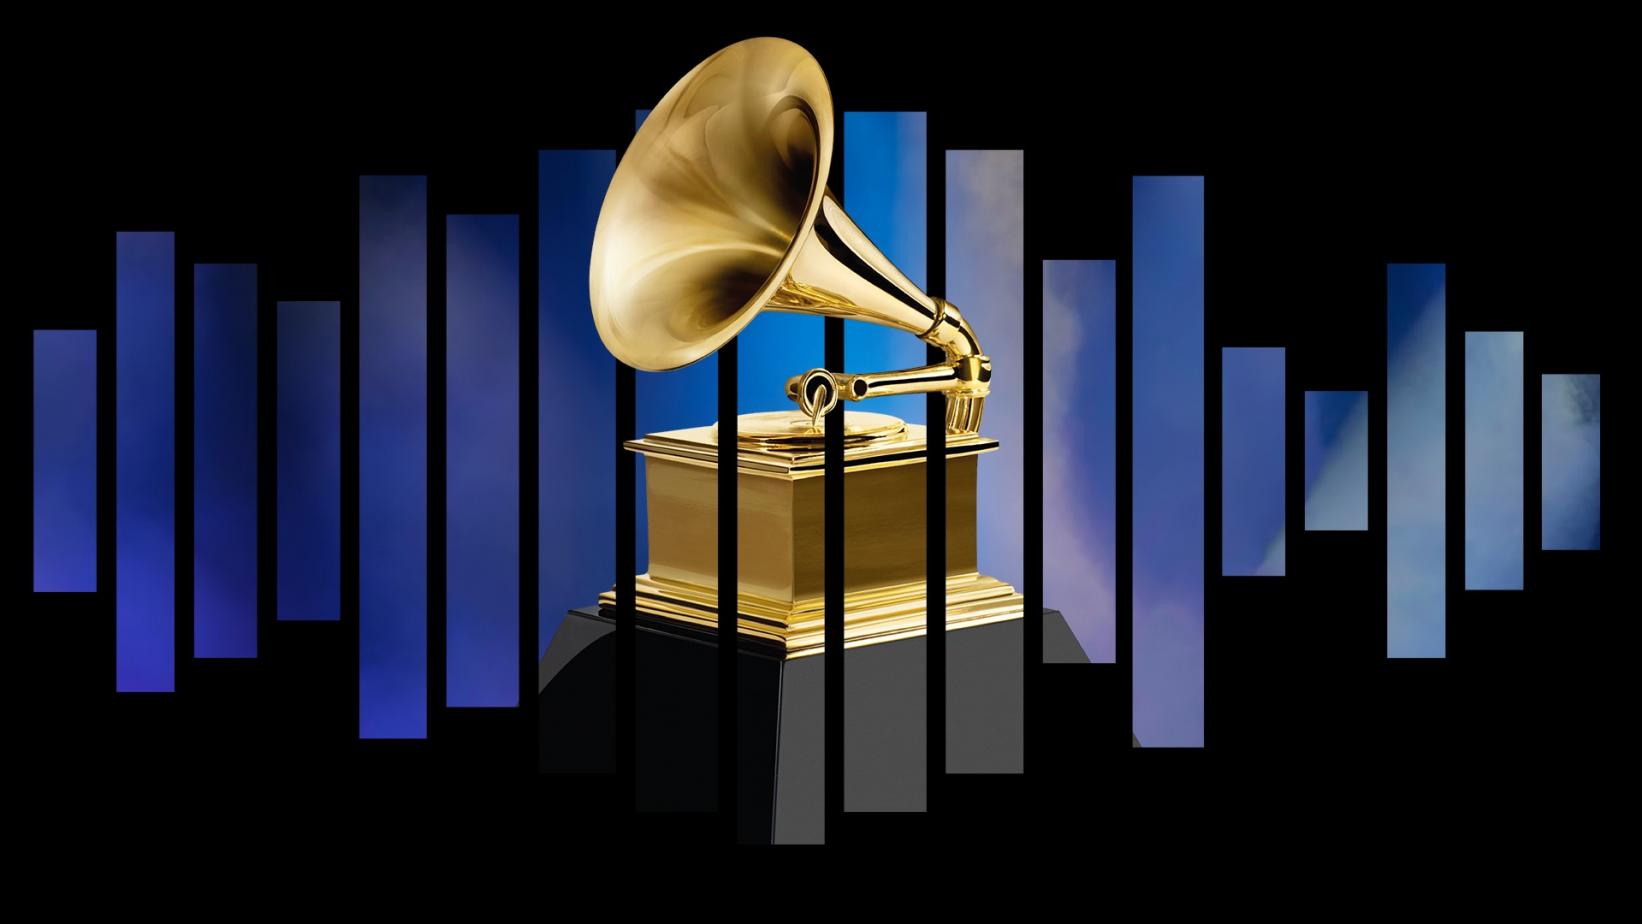 The 61st GRAMMY Awards nominations 2019 – Complete list